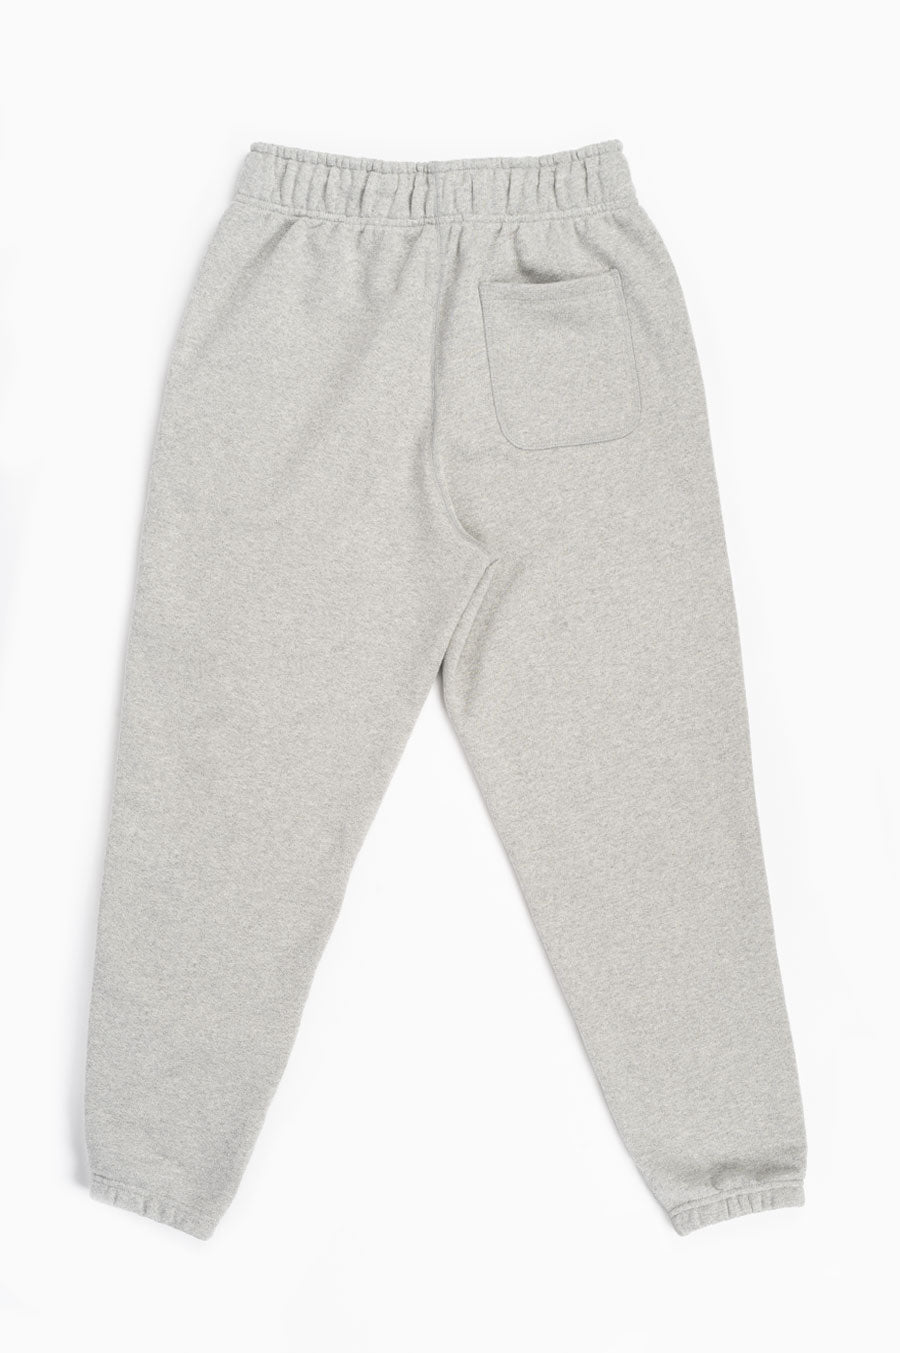 IN USA BALANCE ATHLETIC NEW BLENDS – MADE SWEATPANT GREY